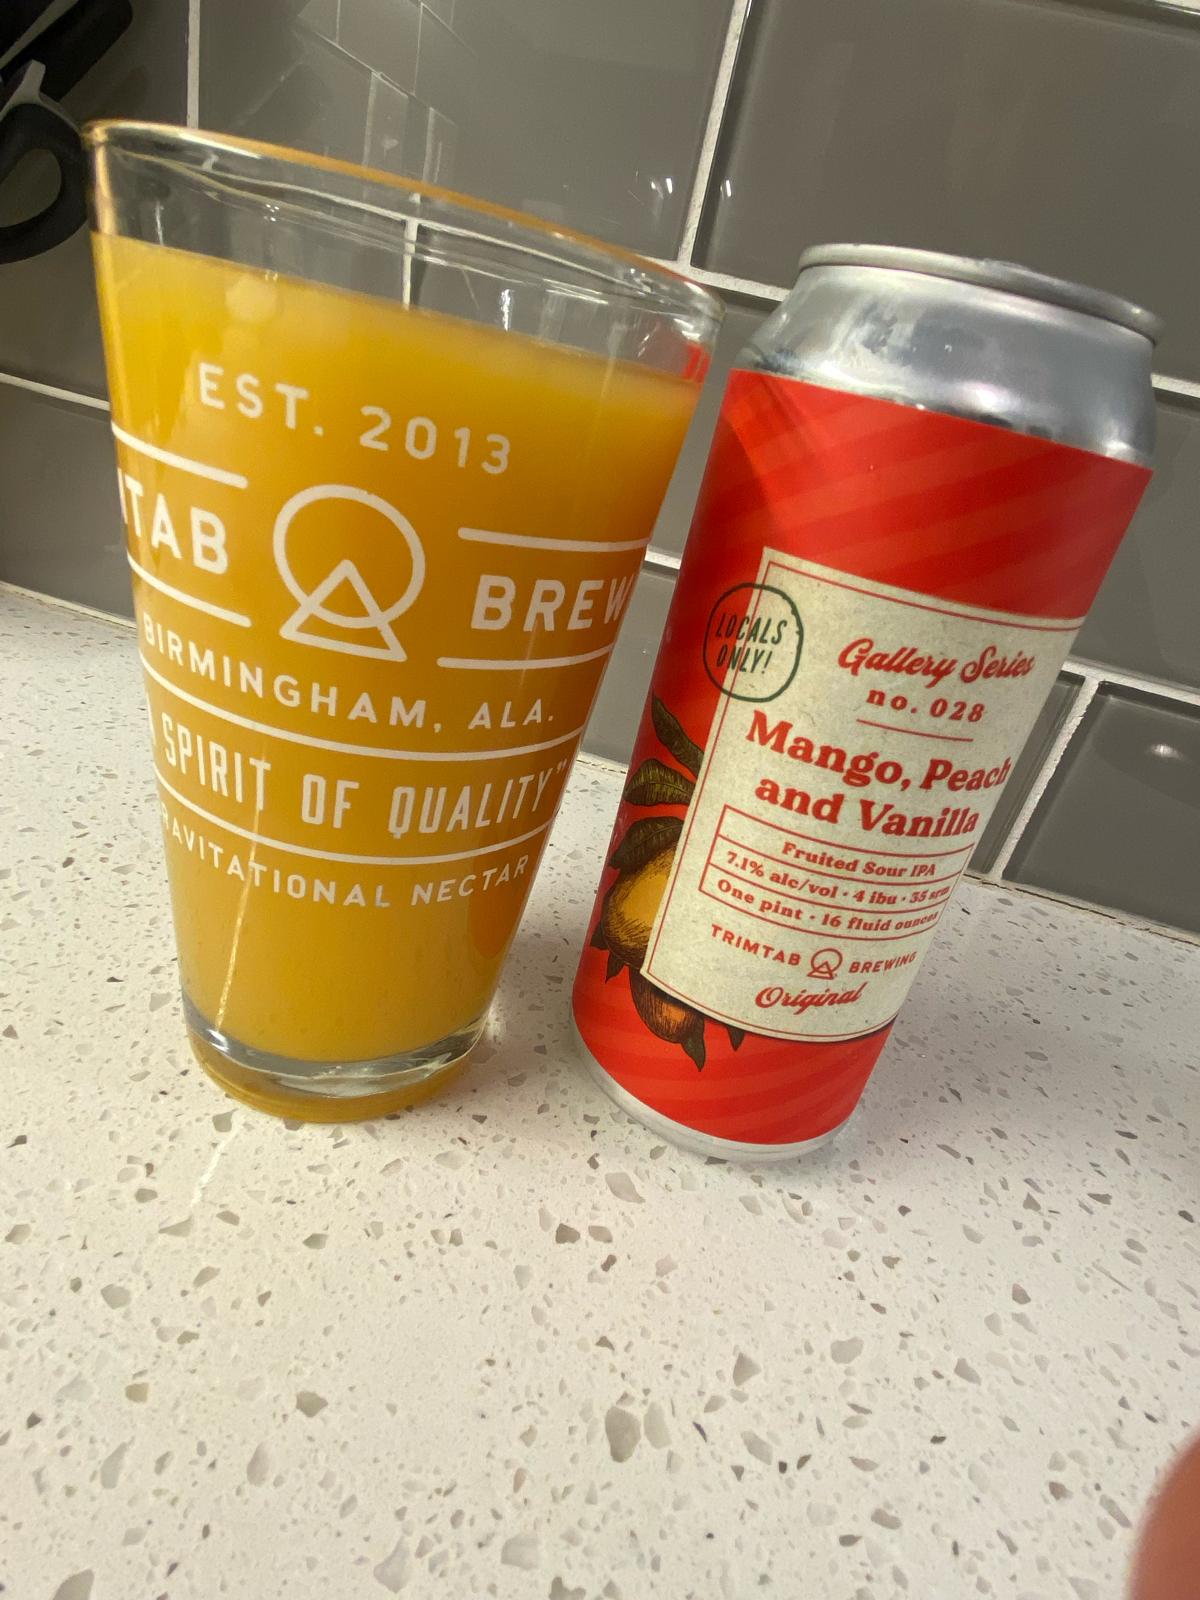 Gallery Series #028 Mango, Peach, and Vanilla Fruited Sour IPA